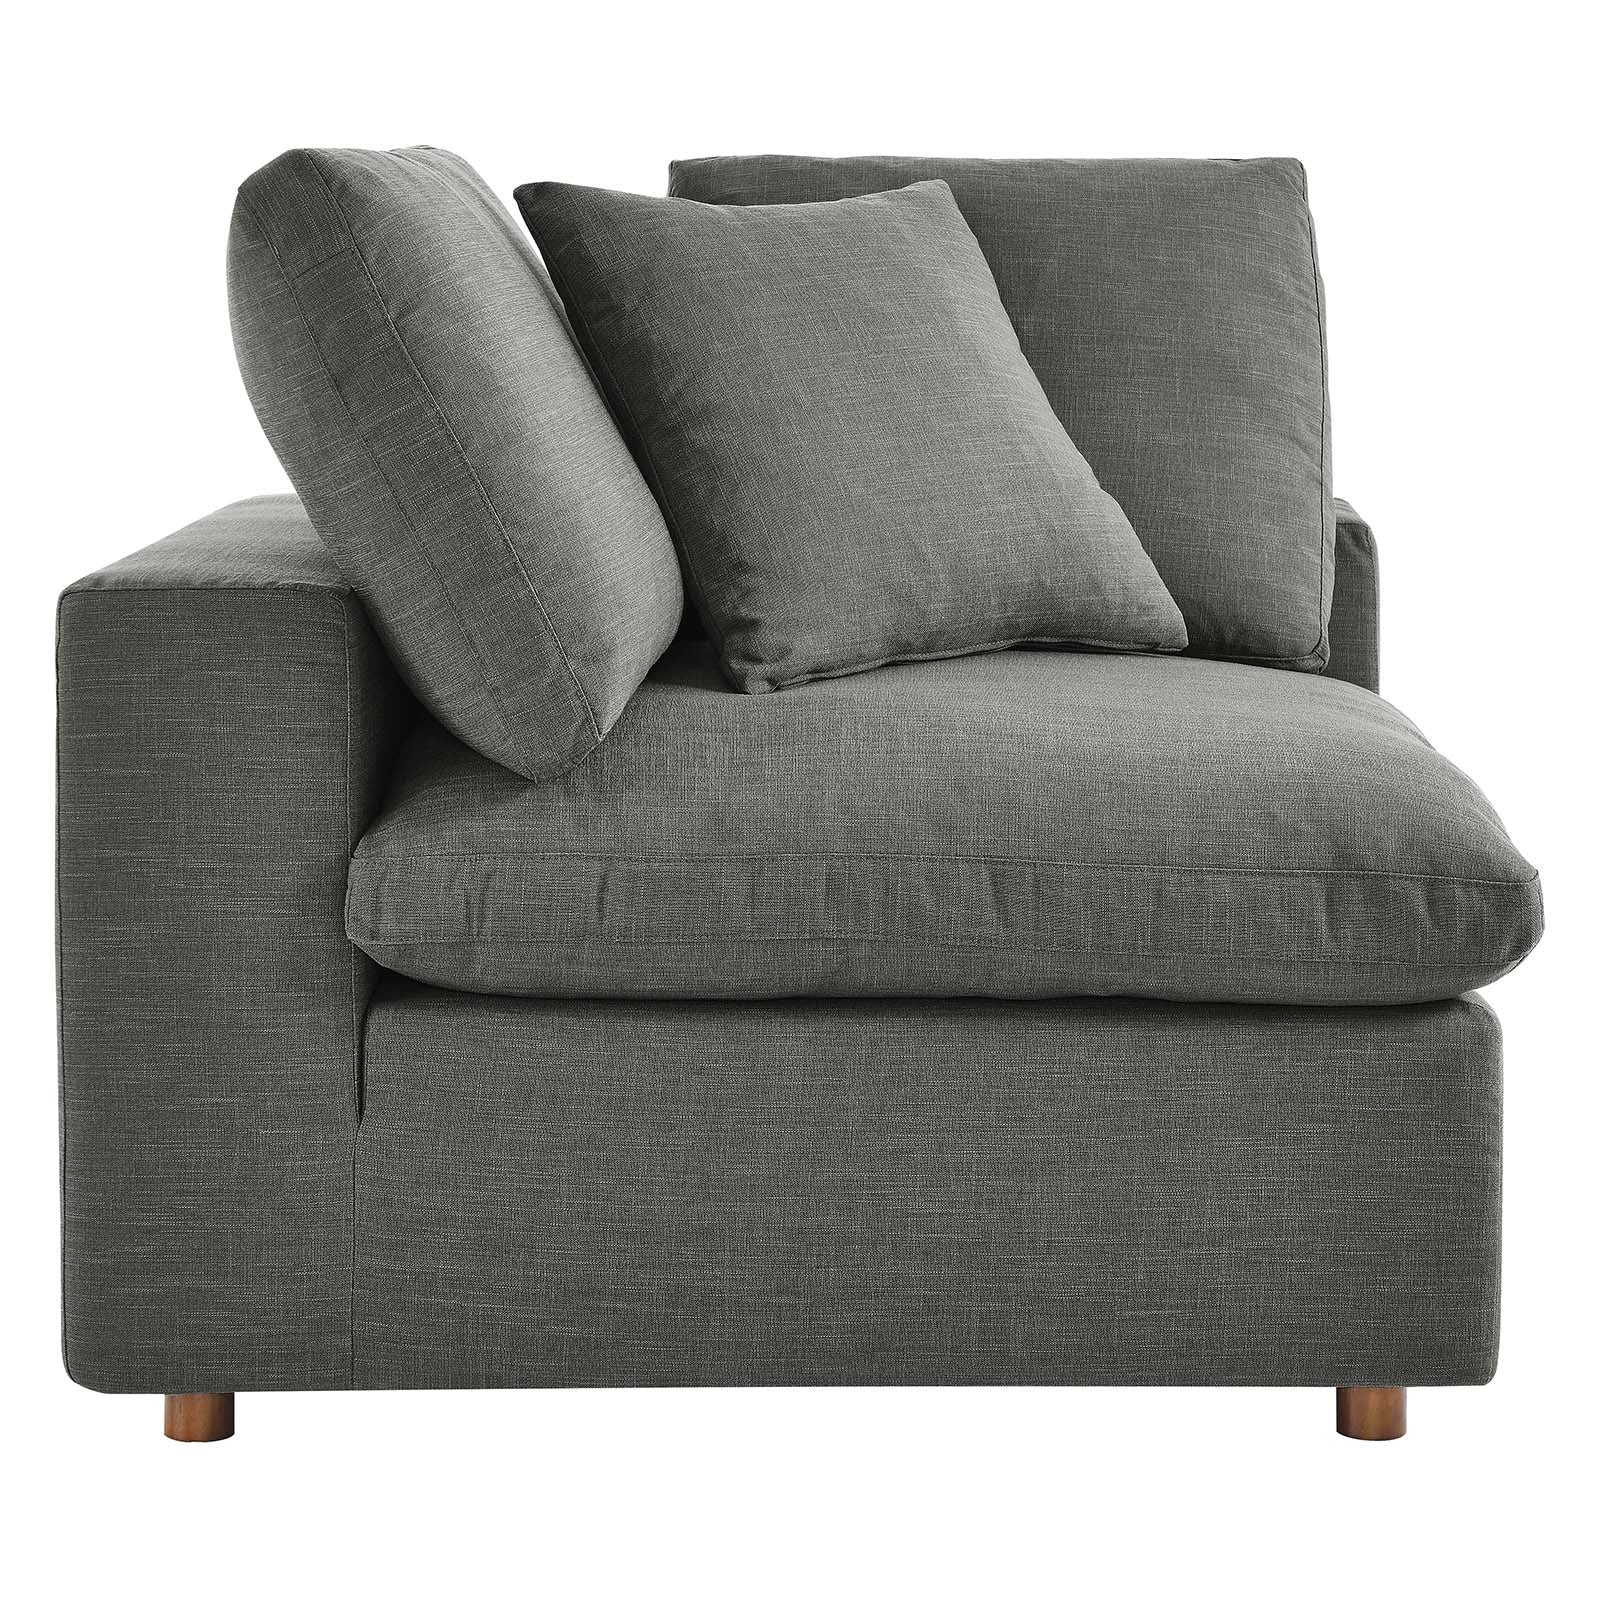 Modway Living Room Sets - Commix Down Filled Overstuffed 5 Piece 35" H Sectional Sofa Set Gray